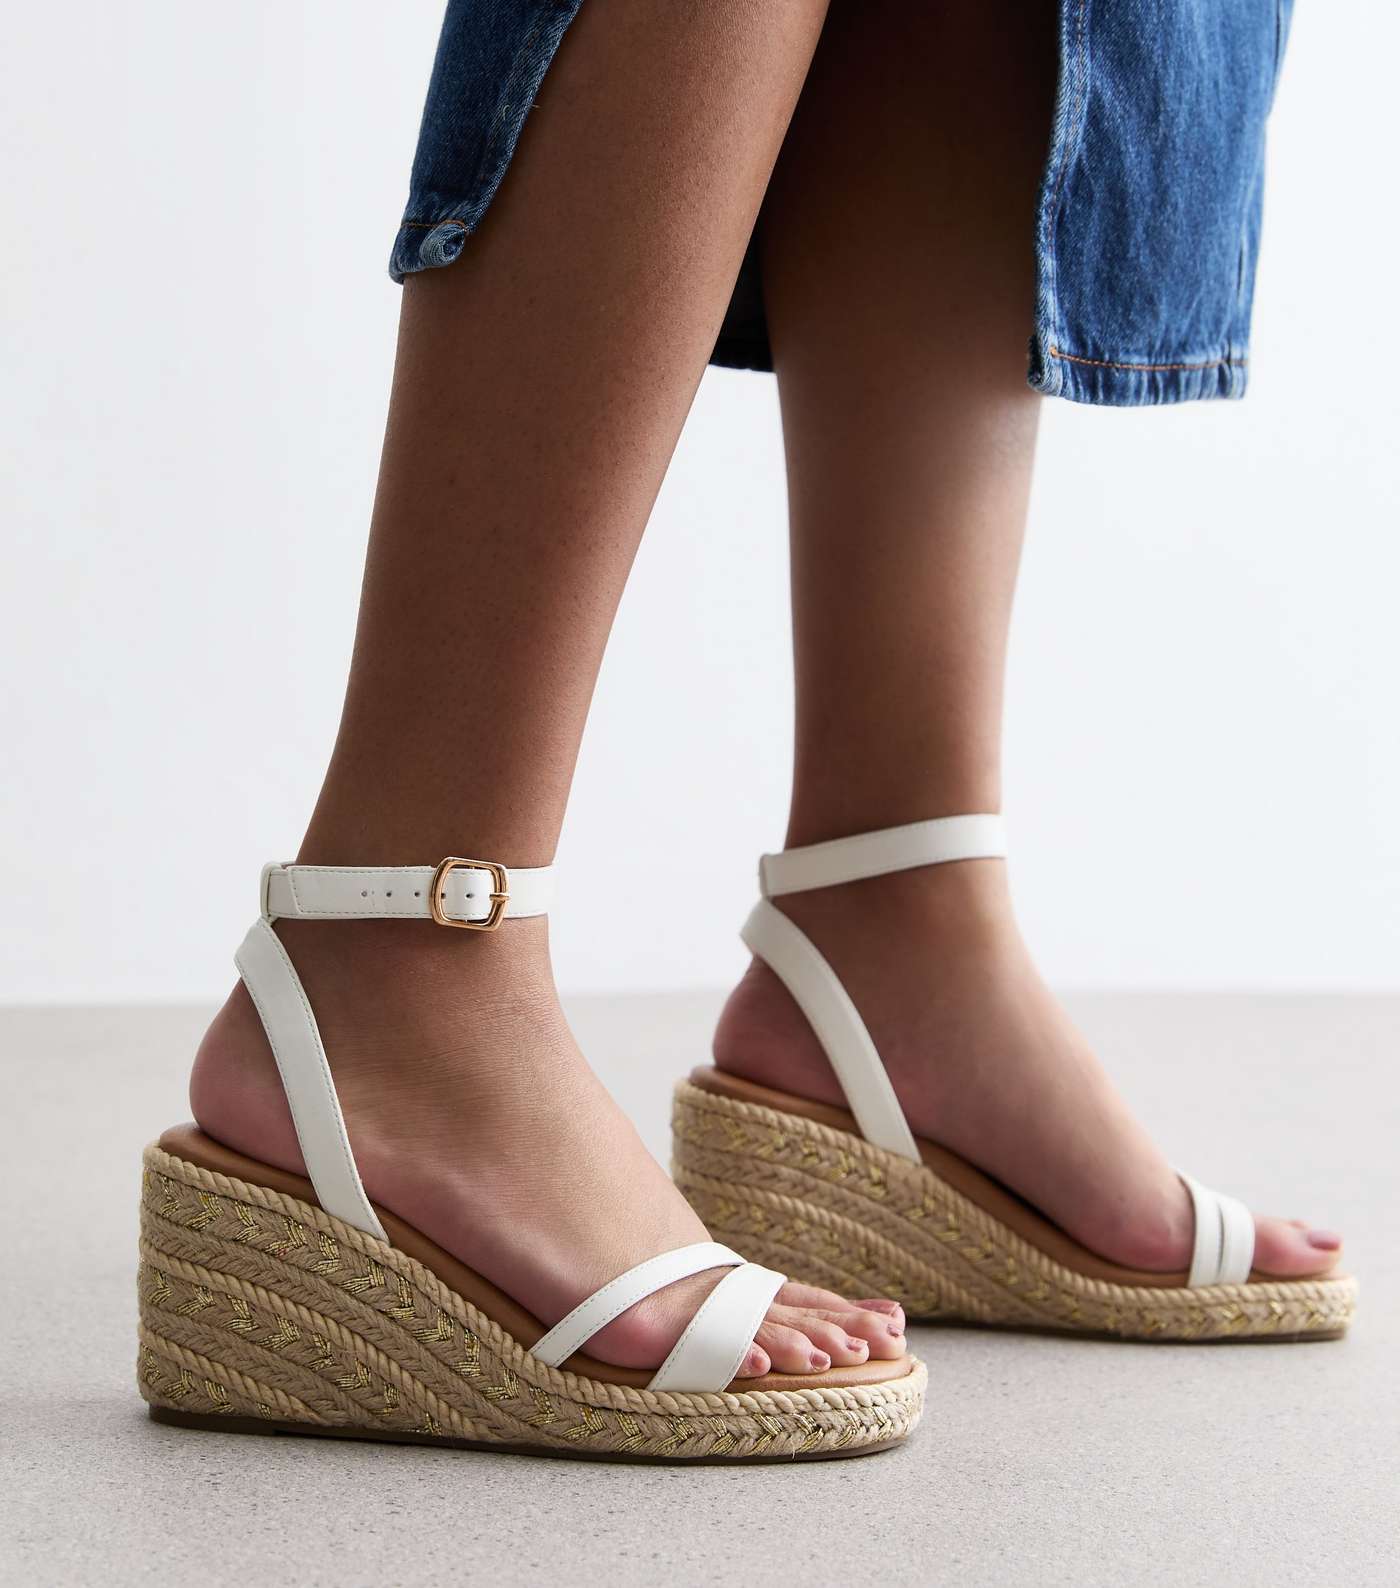 White Leather-Look Strappy Espadrille Wedge Heel Sandals Image 2